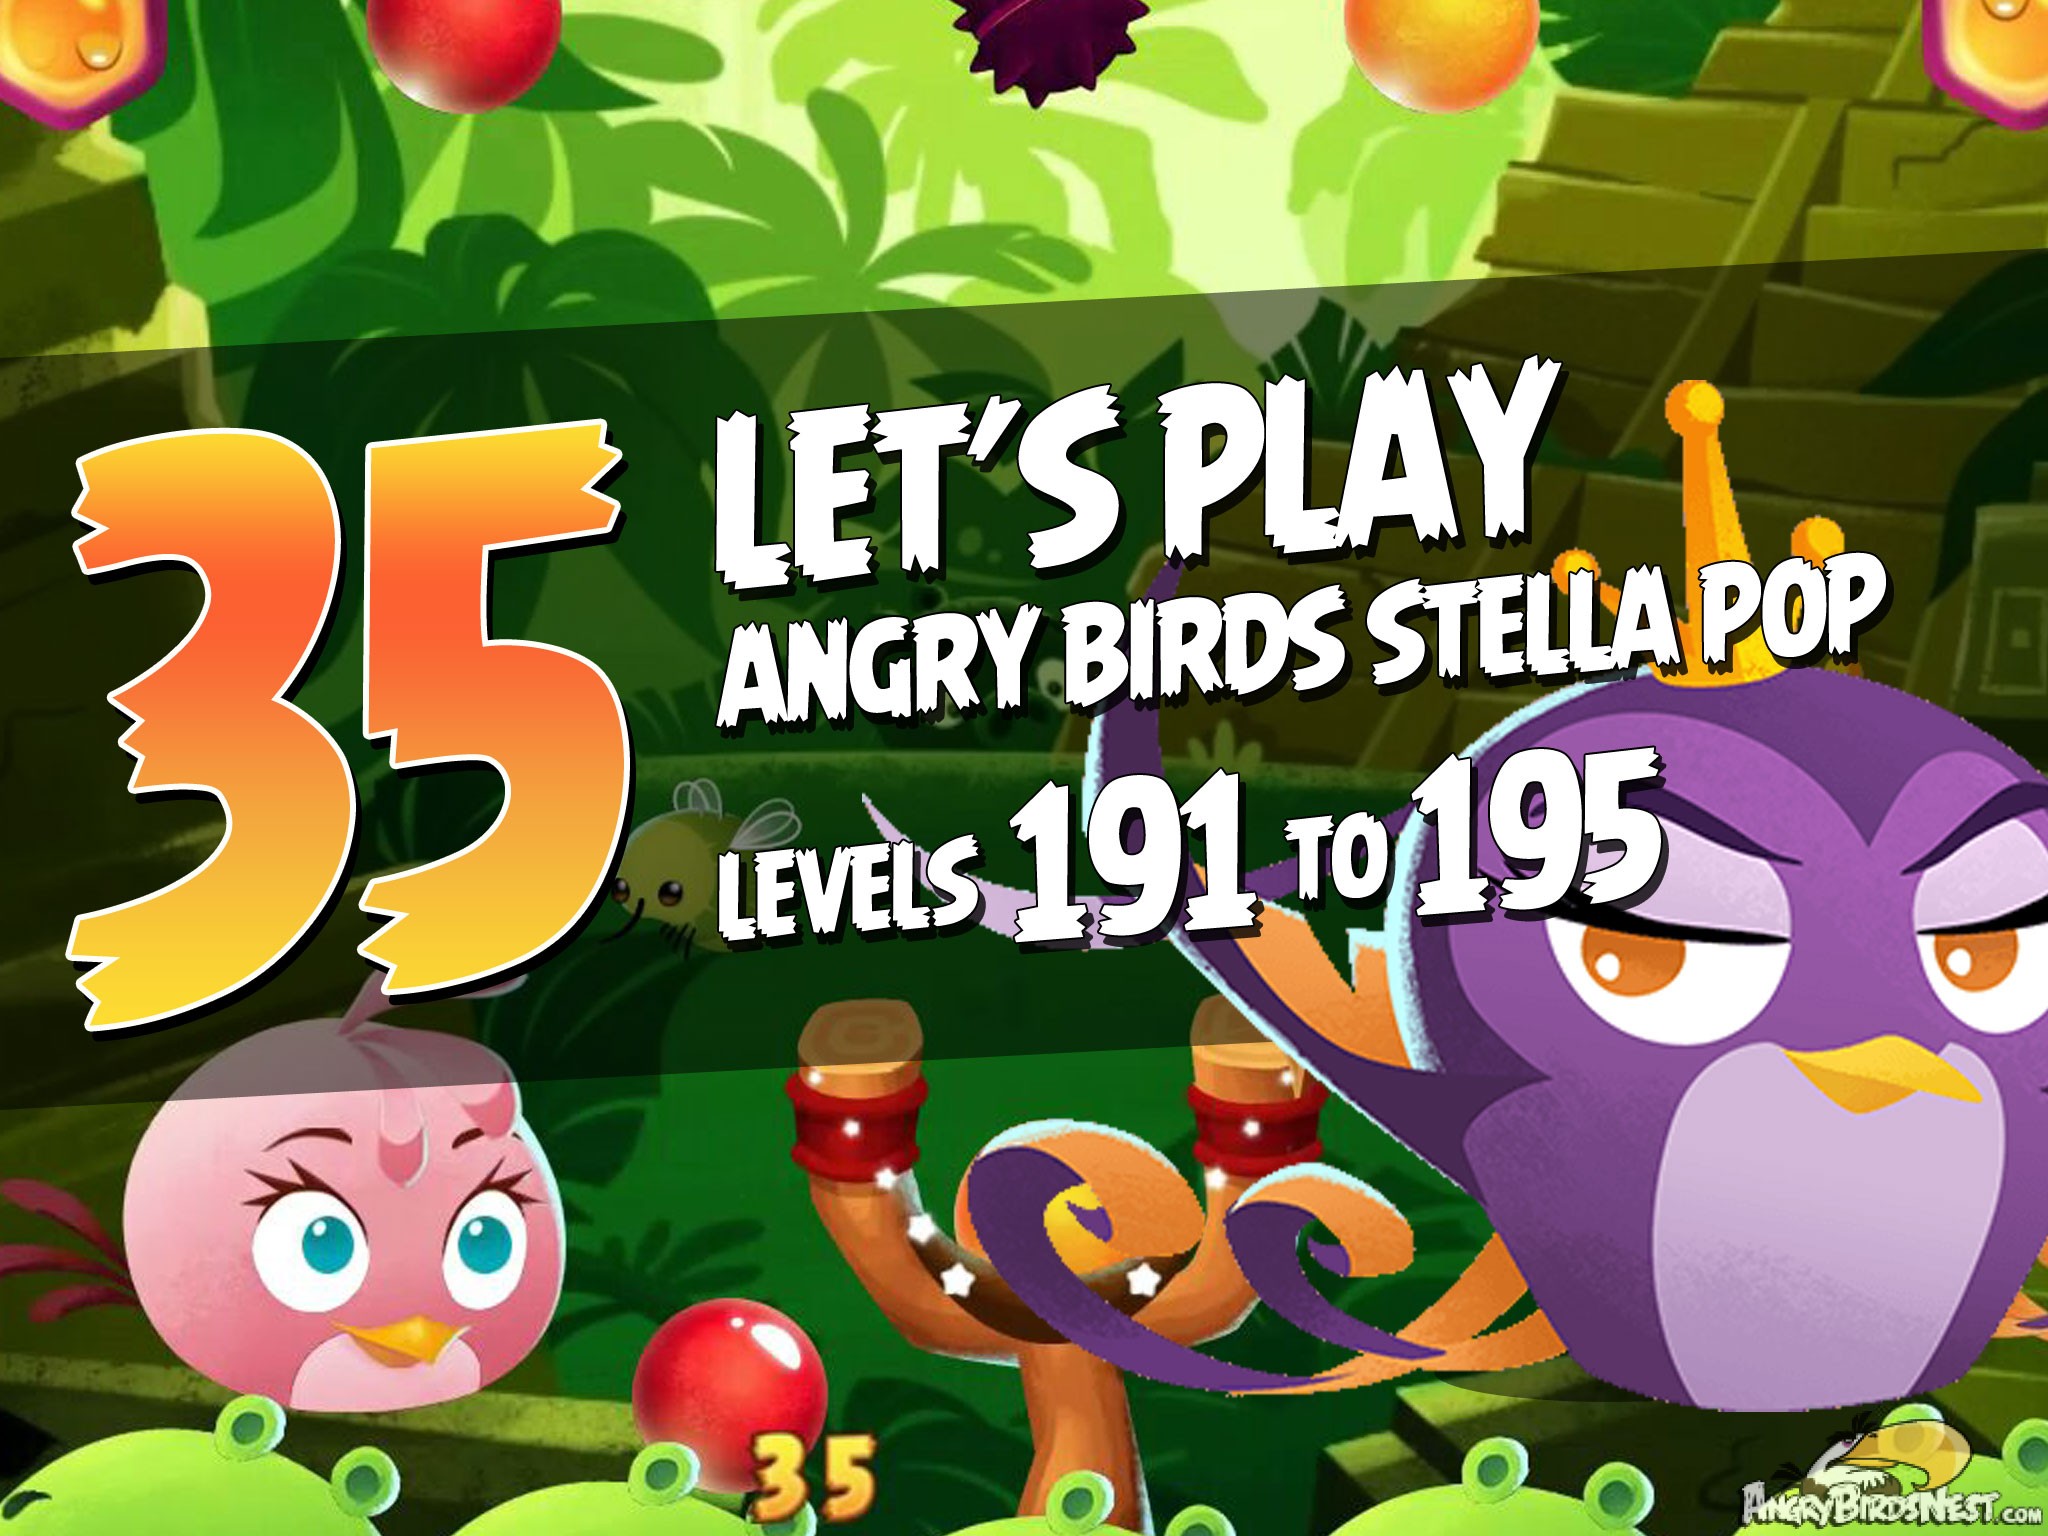 Angry Birds Stella Pop Featured Image Levels 191 thru 195